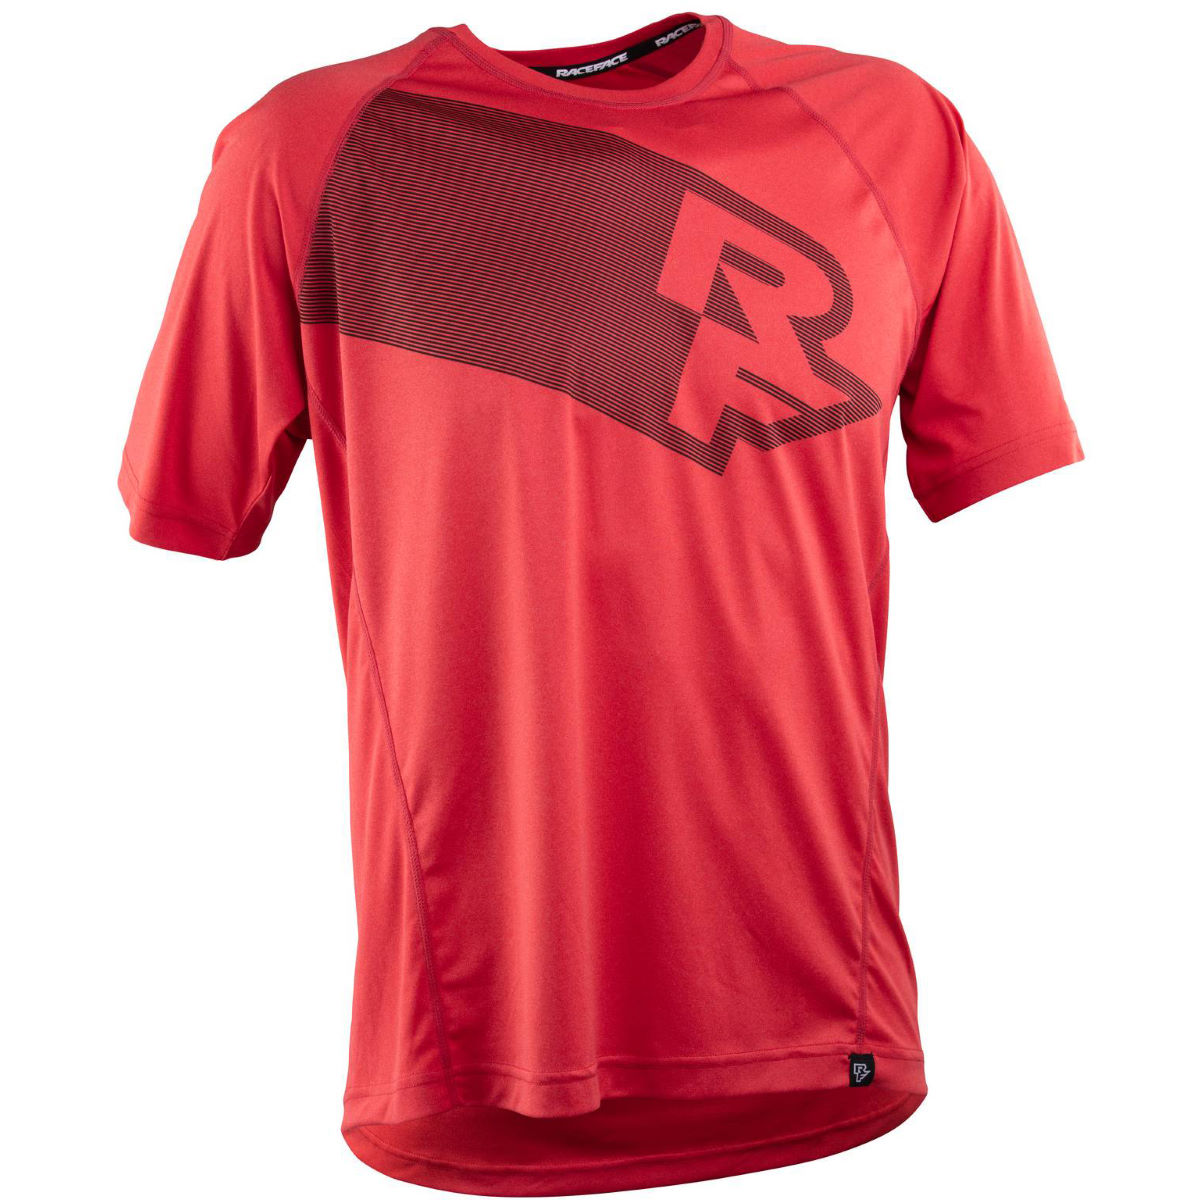 Race Face Trigger Jersey - Maillots